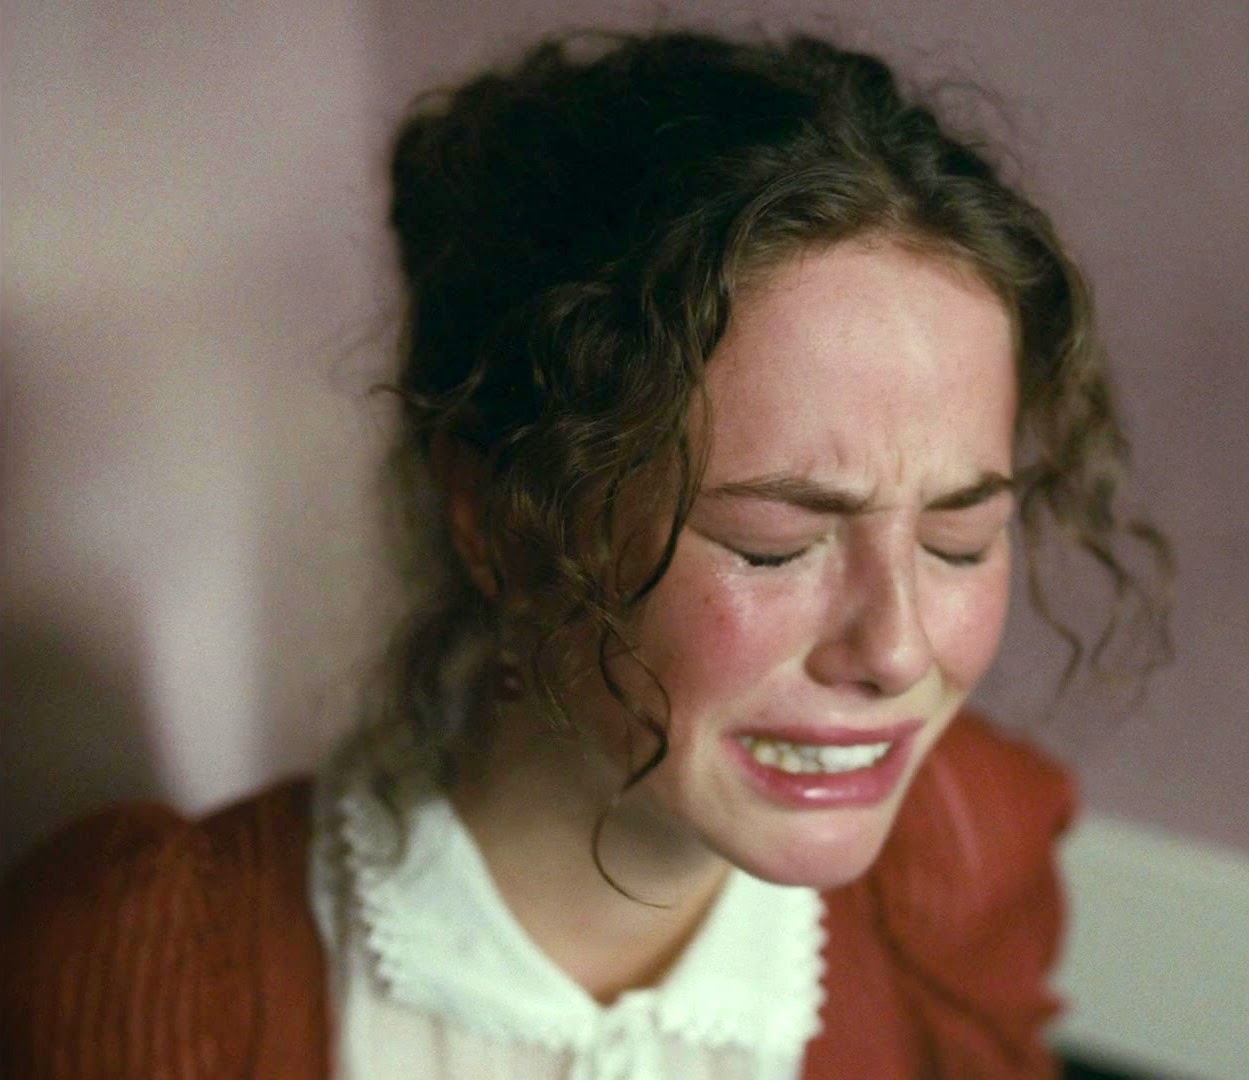 They laughed him. Wuthering heights 2011. Kaya Scodelario Wuthering heights, 2011. Kaya Scodelario in Wuthering heights. Wuthering heights Merle Oberon.